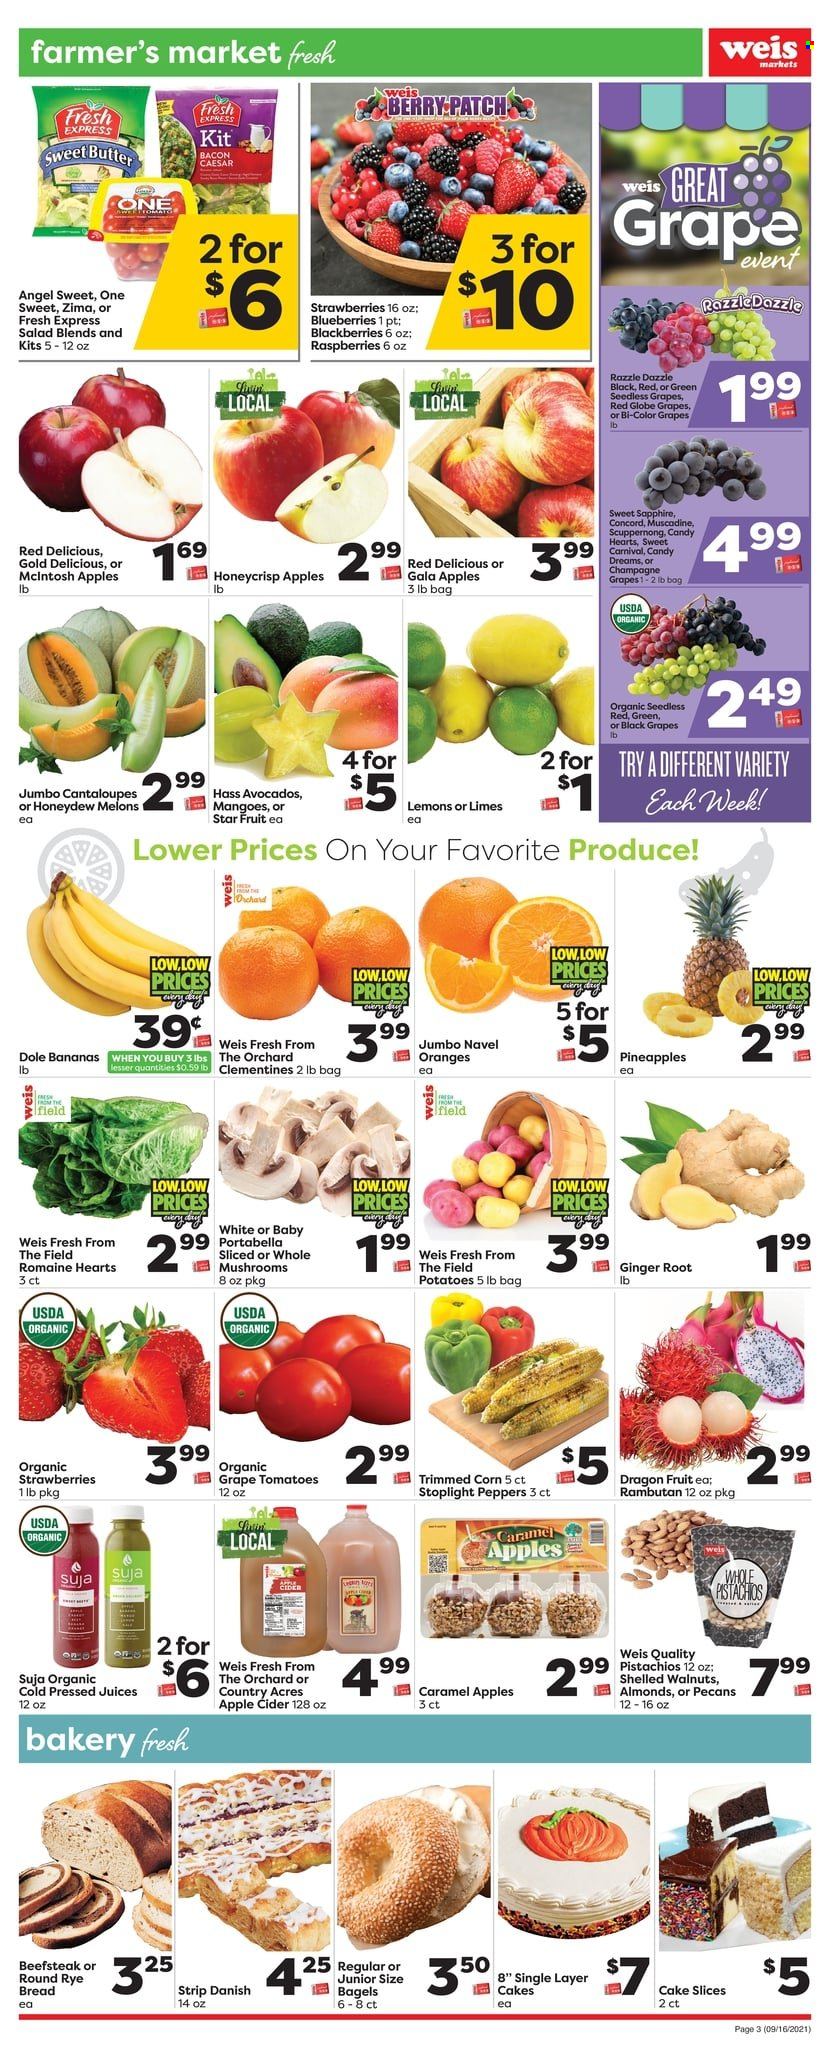 thumbnail - Weis Flyer - 09/16/2021 - 09/23/2021 - Sales products - mushrooms, seedless grapes, star fruit, bagels, bread, cake, cantaloupe, corn, ginger, tomatoes, potatoes, salad, Dole, peppers, avocado, bananas, blackberries, blueberries, Gala, limes, Red Delicious apples, Red Globe, strawberries, honeydew, pineapple, oranges, dragon fruit, bacon, butter, caramel, almonds, walnuts, pecans, pistachios, juice, champagne, apple cider, cider, clementines, melons, lemons, navel oranges. Page 3.